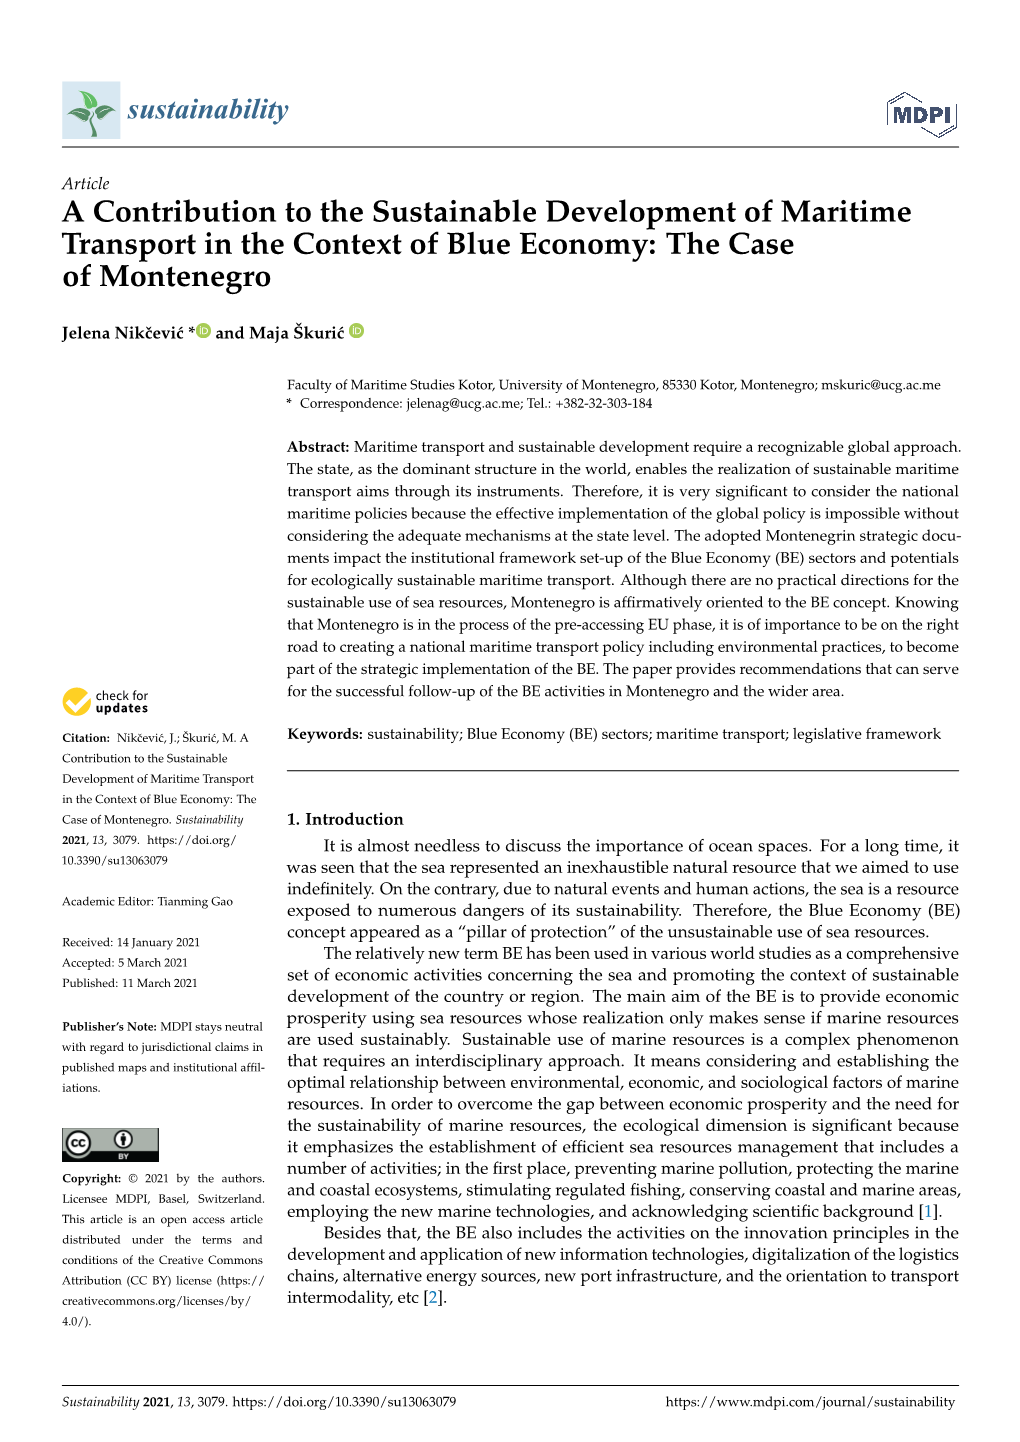 A Contribution to the Sustainable Development of Maritime Transport in the Context of Blue Economy: the Case of Montenegro